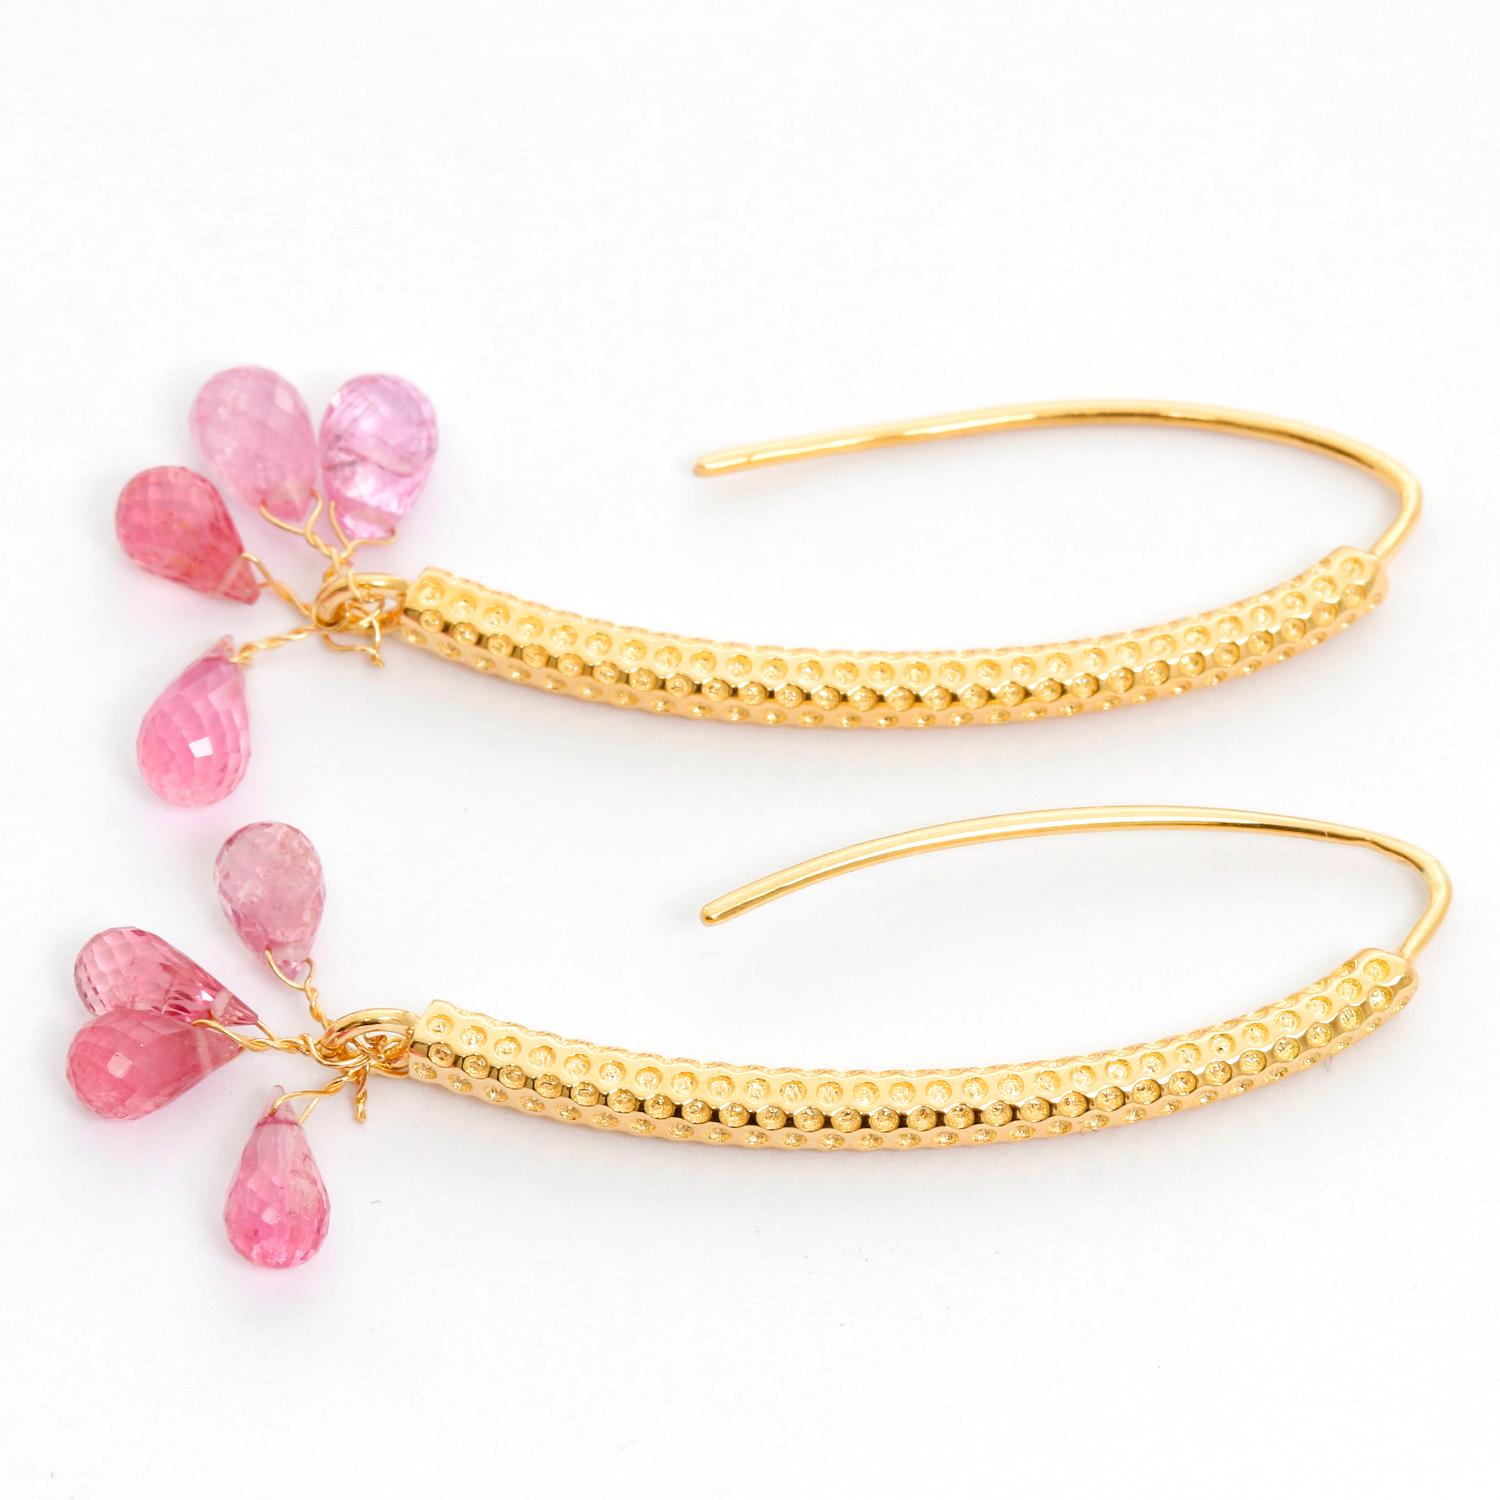 18K Yellow Gold and Pink Sapphire Briolette Earrings  - Four pink Sapphire briolettes weighing 6.25 cts hanging on 18K Yellow gold oval hoops.